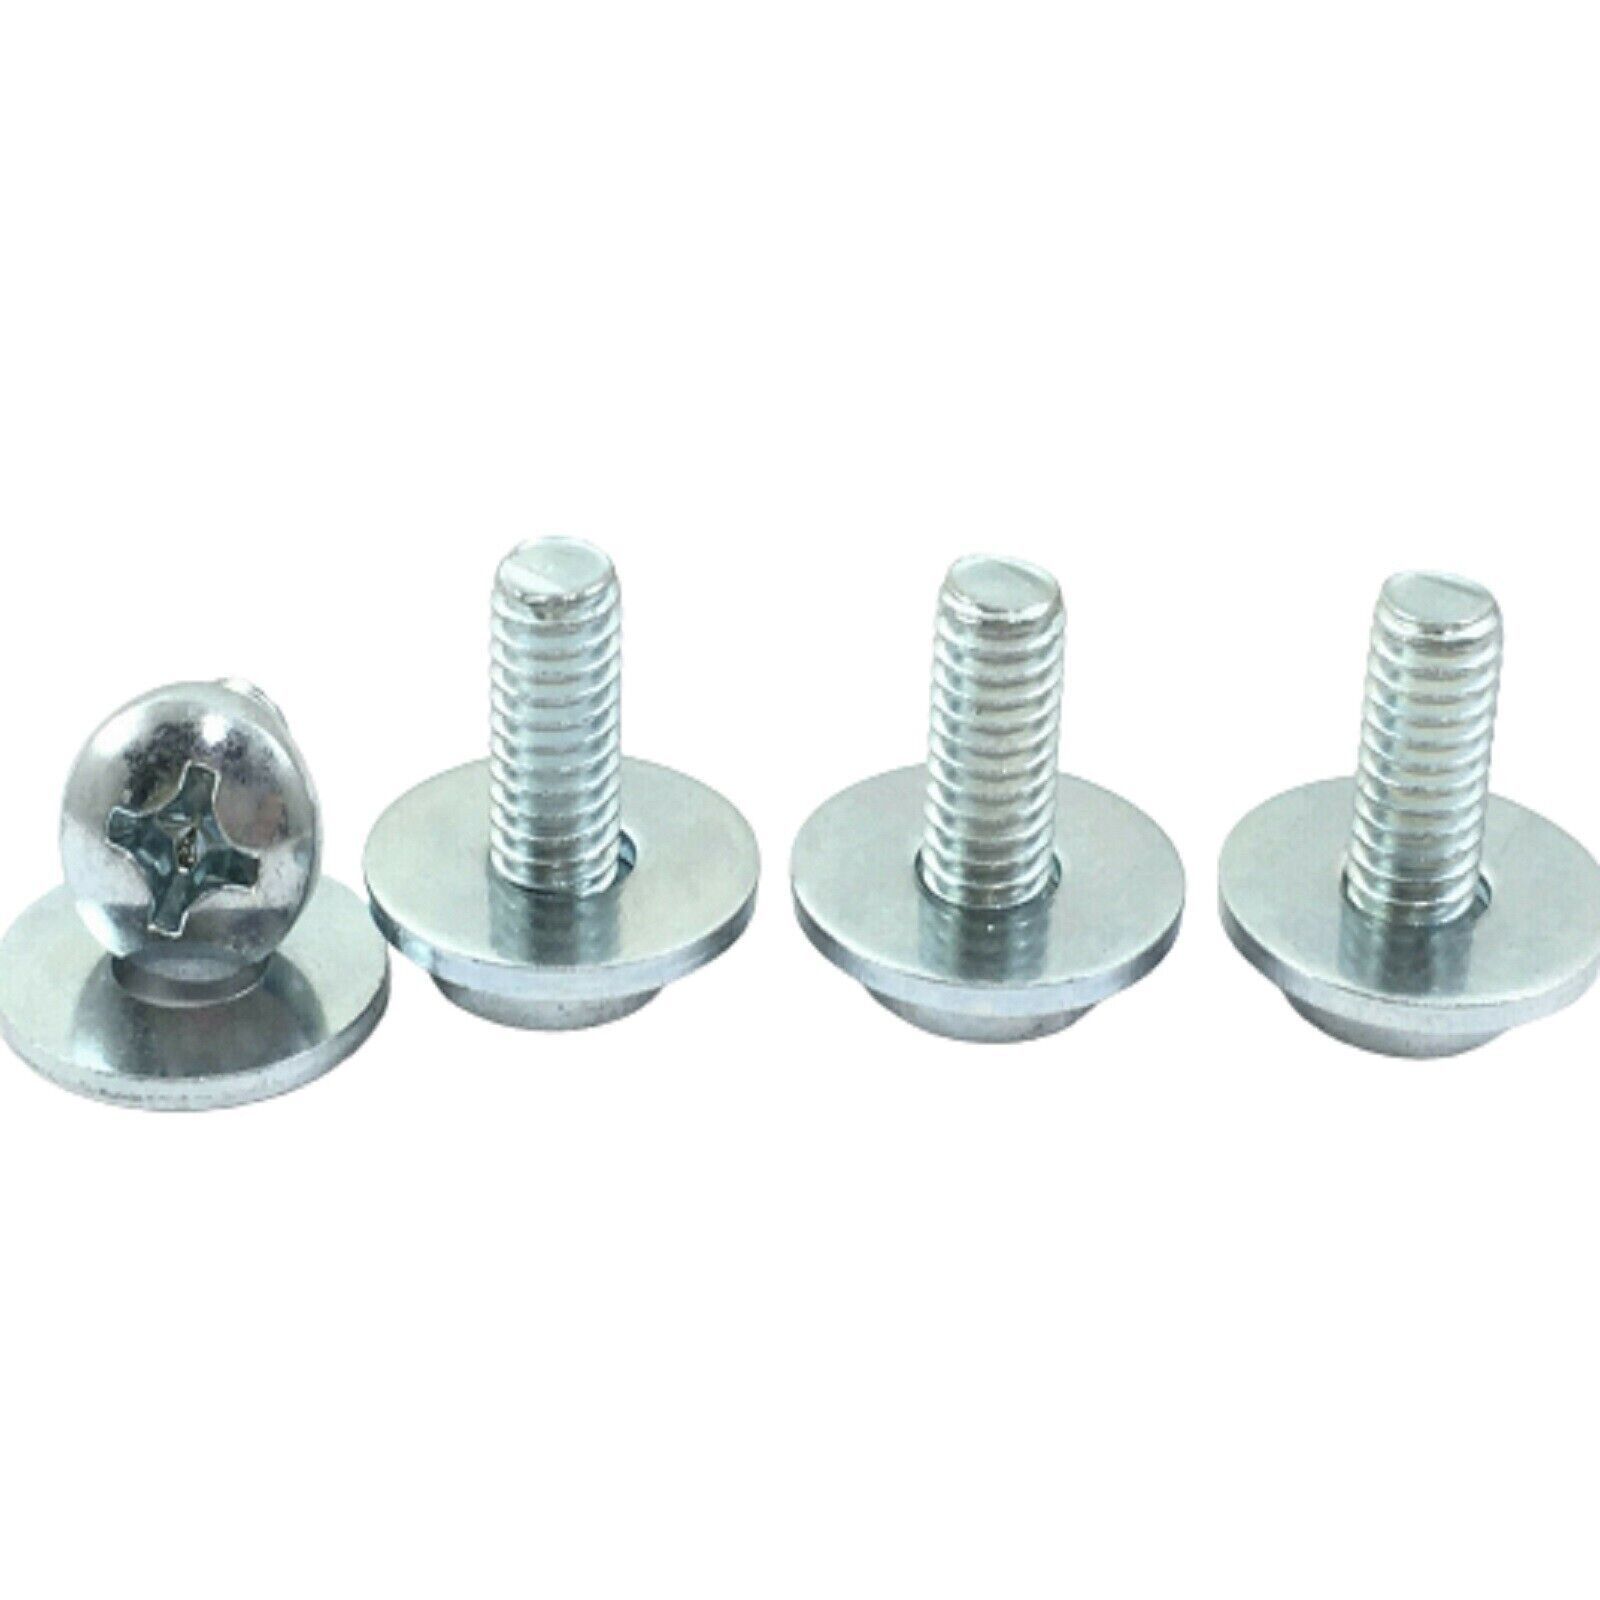 LG Wall Mount Screws for Mounting 27GL850, 27GN750, 27GN75B, 27GN75P, 27GN950 - $7.91